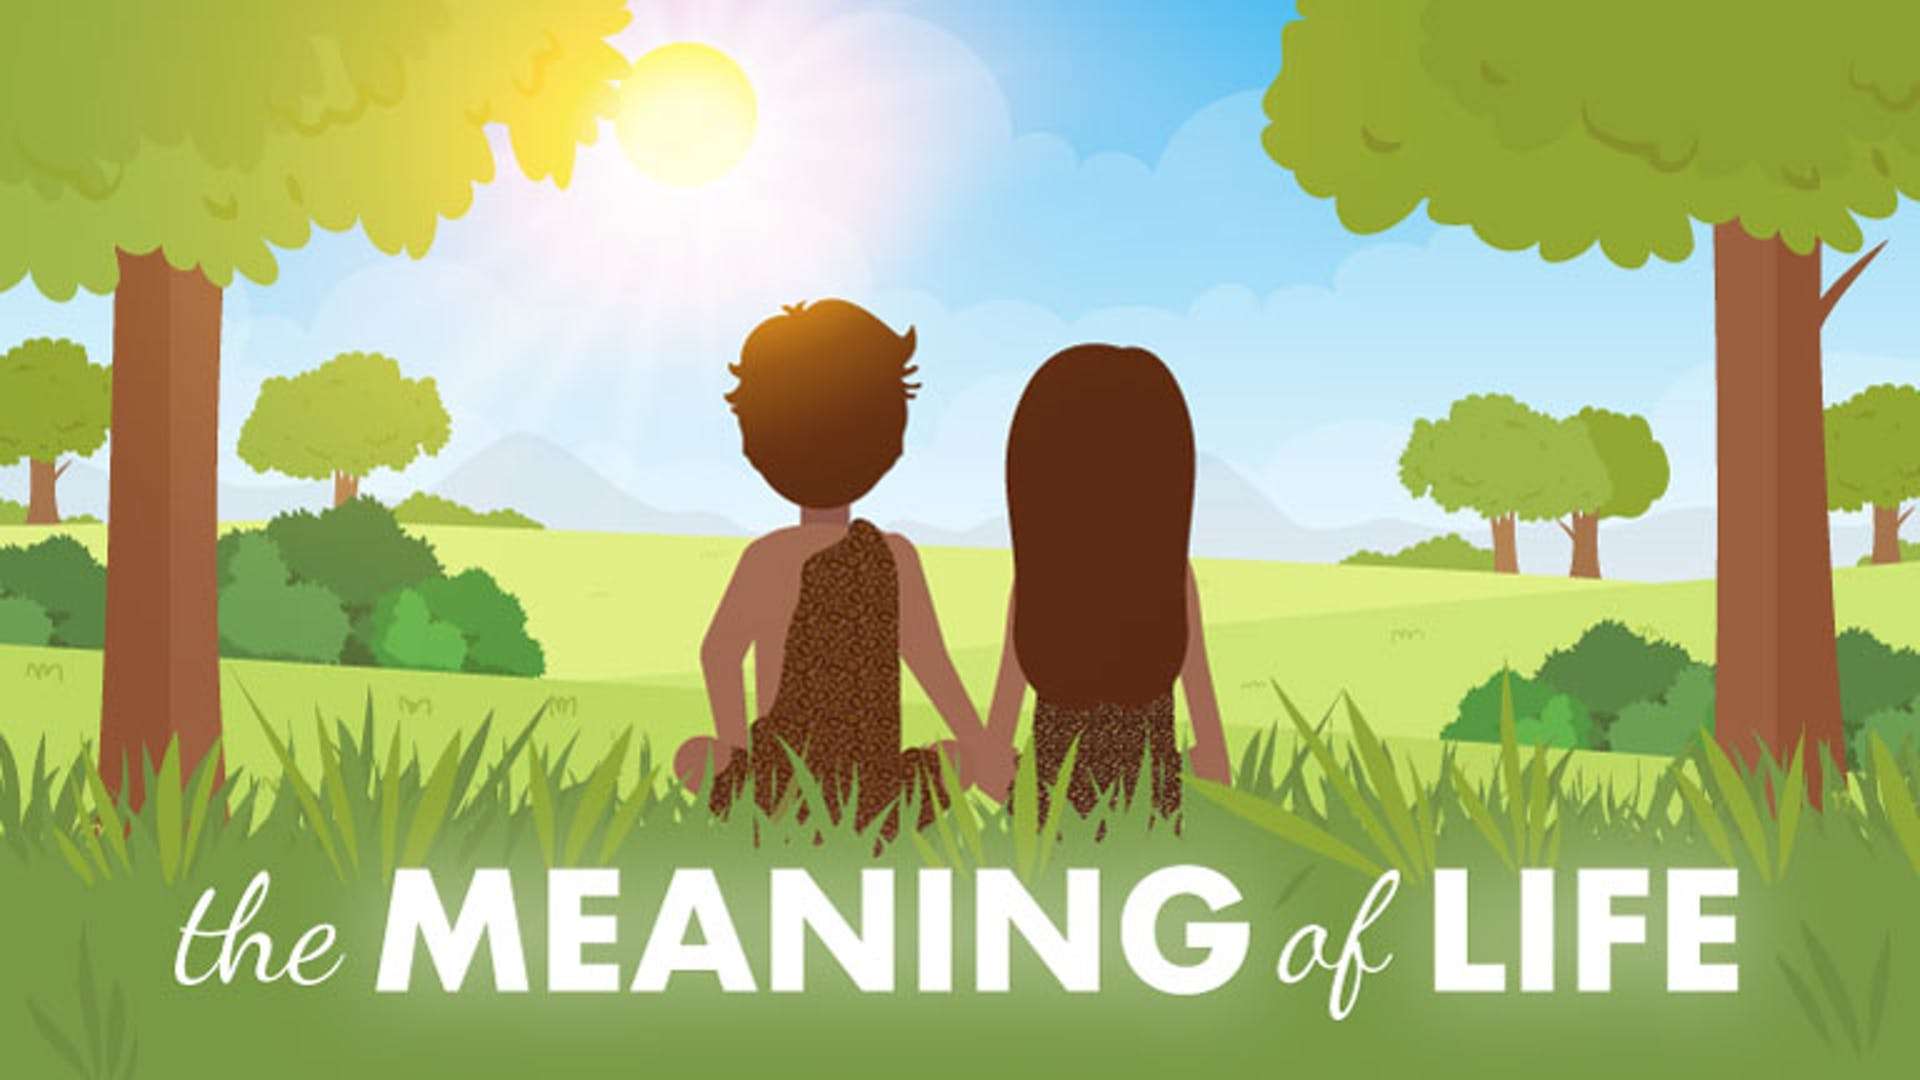 What Is the Meaning of Life, According to the Bible?